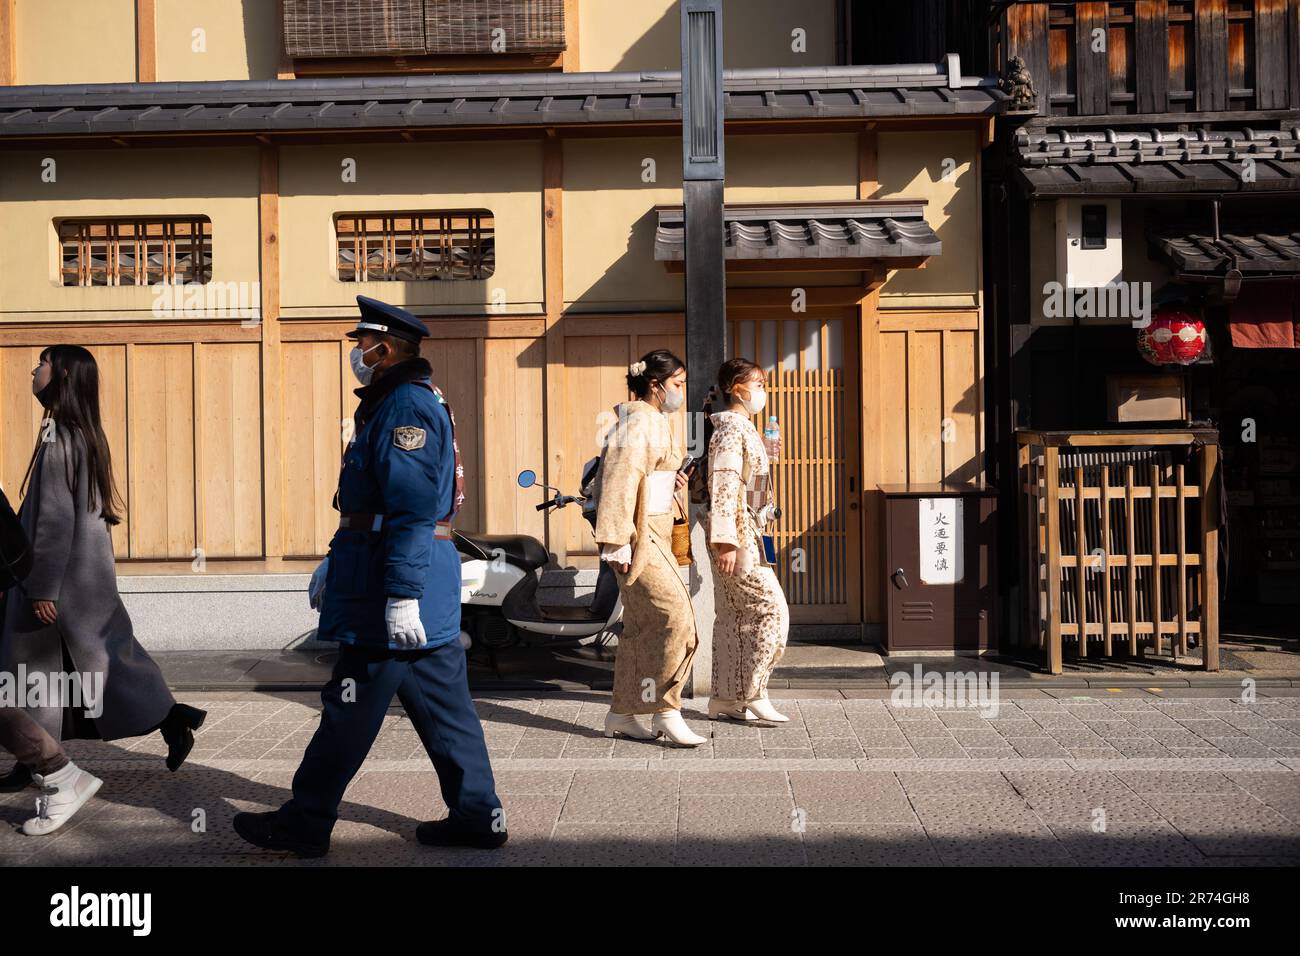 A group of police officers in uniform strolling down a vibrant city street in c Stock Photo